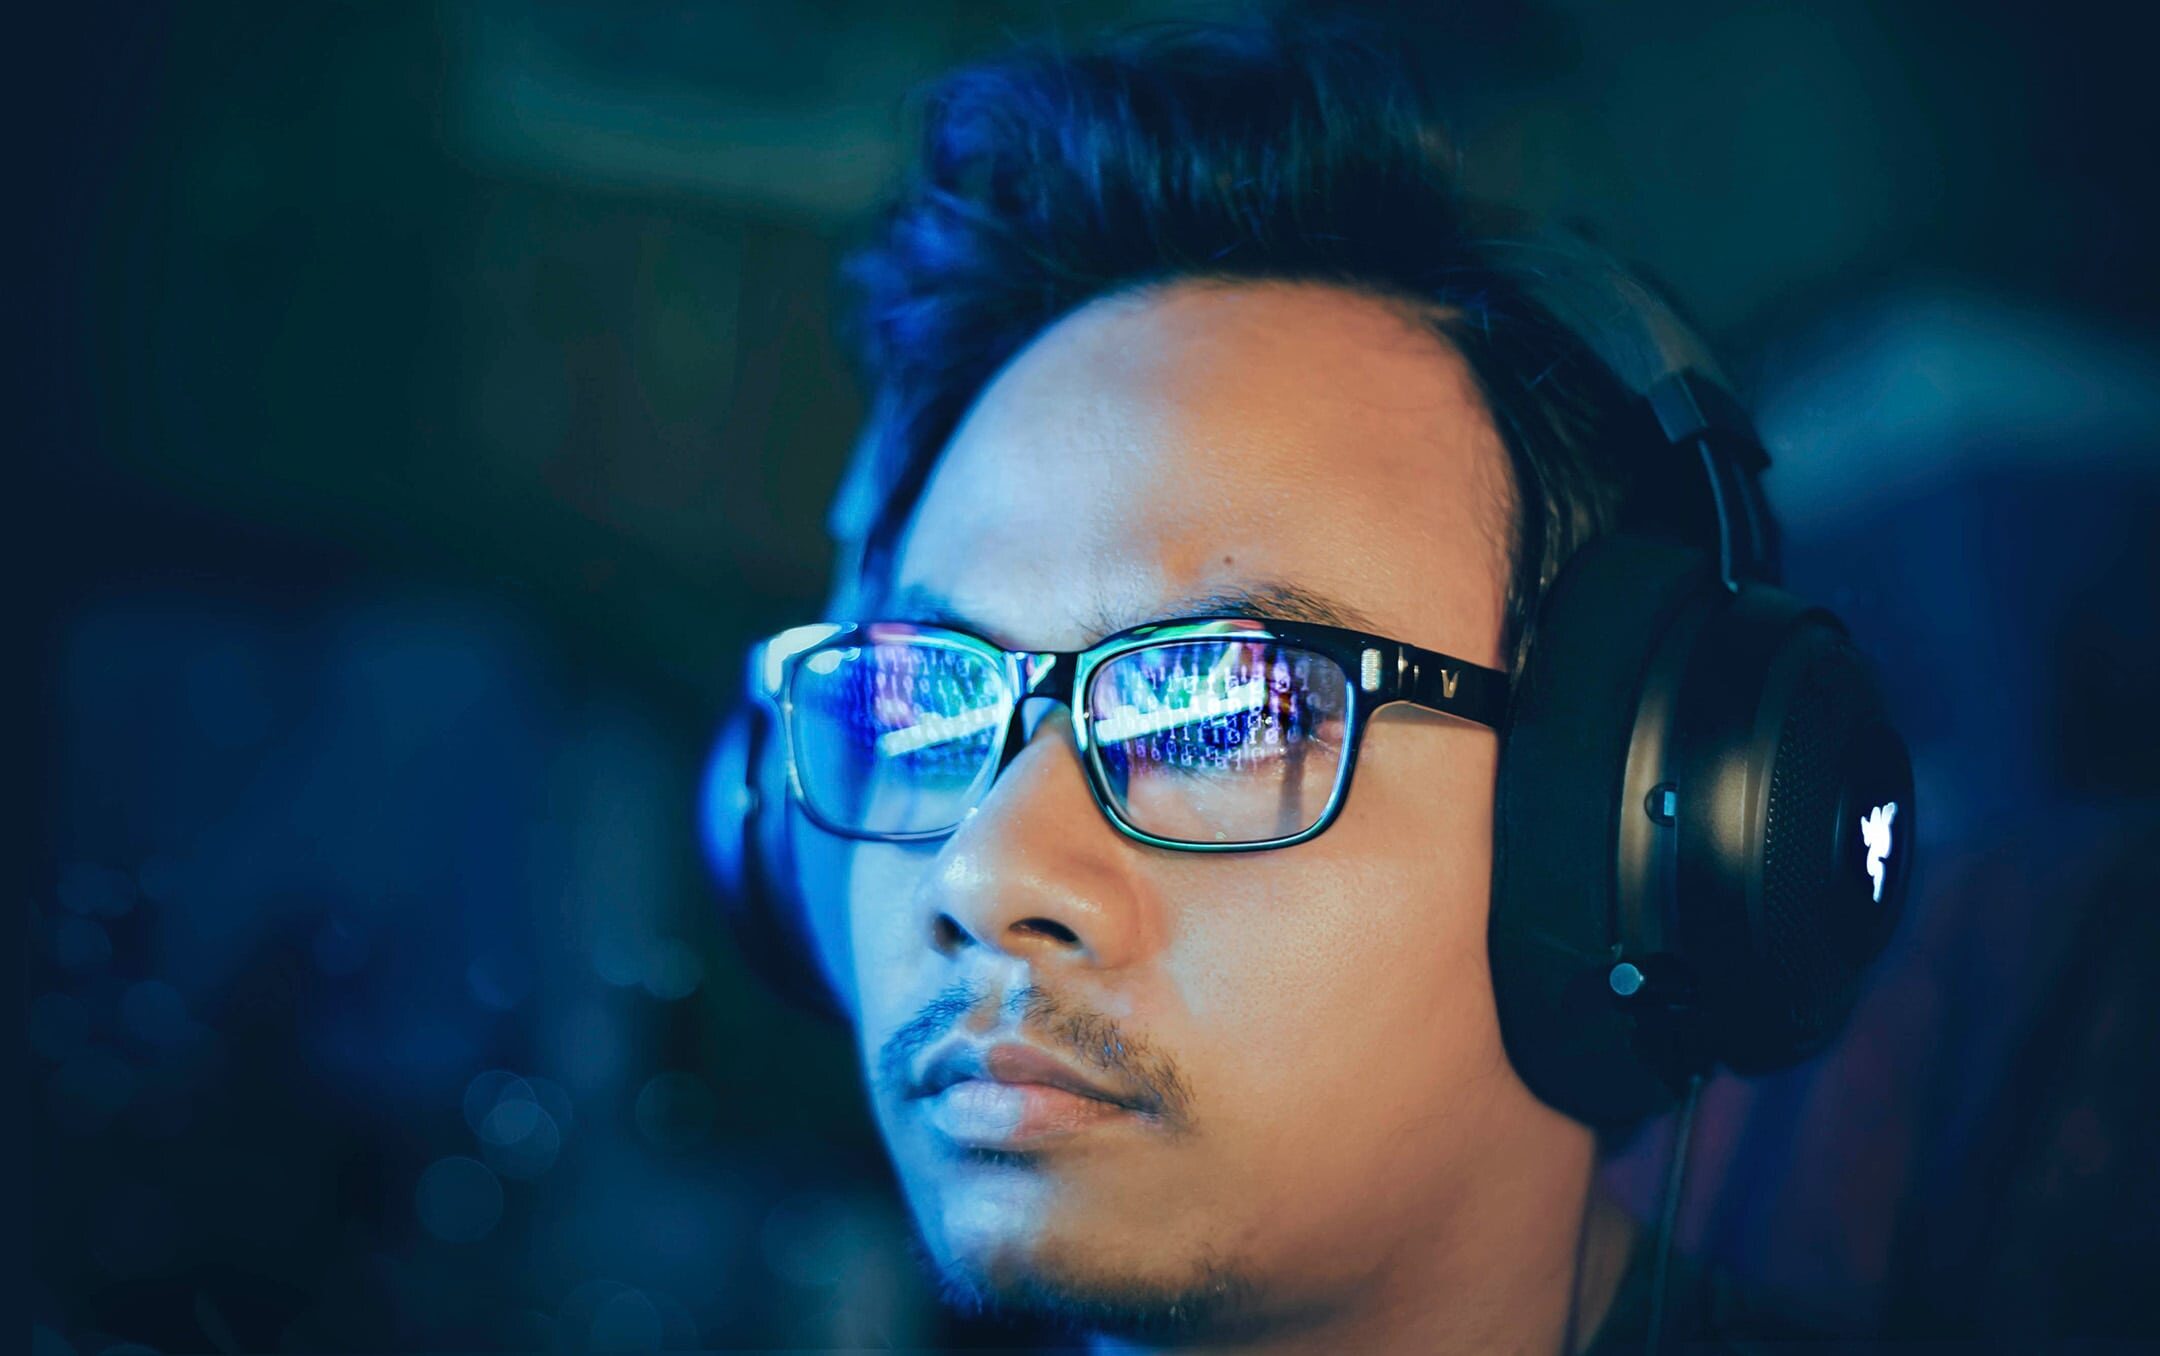 How To Wear Gaming Headset With Glasses